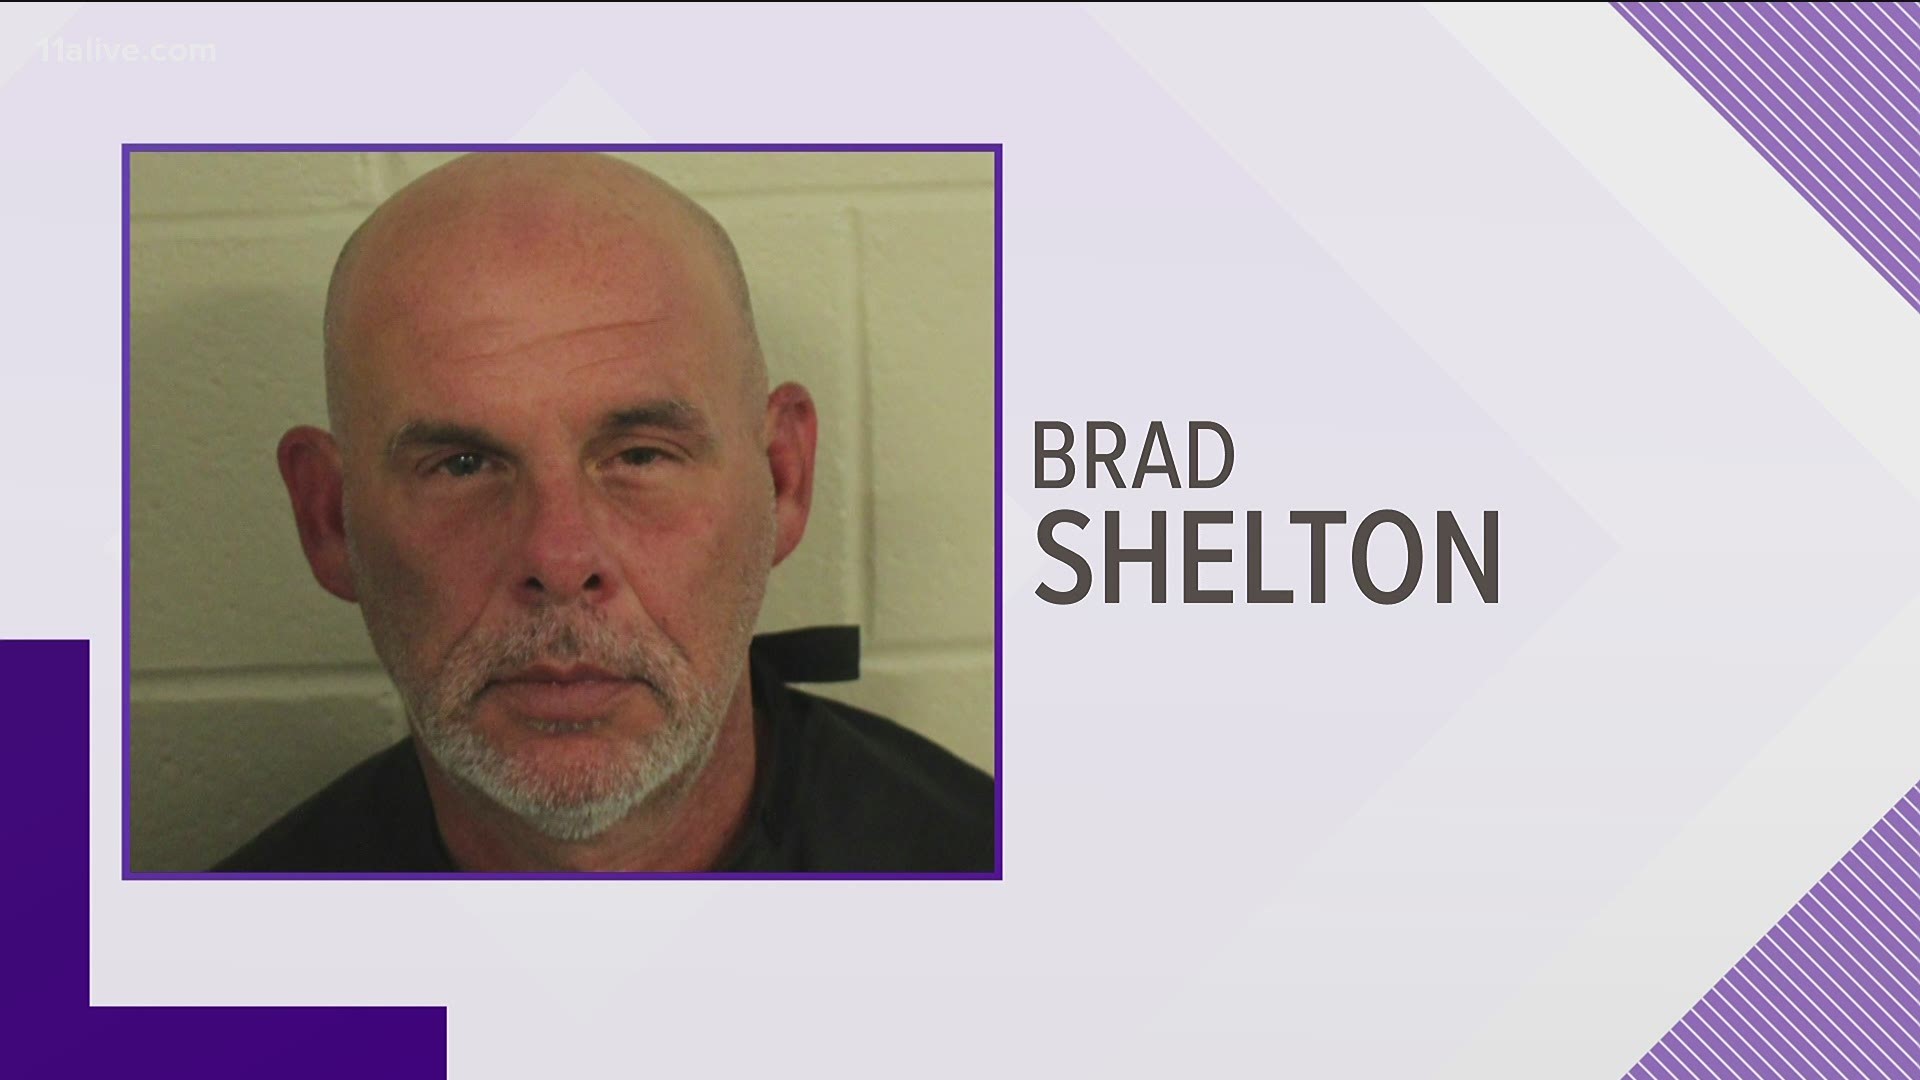 The police report said Brad Shelton allegedly admitted to officers he had taken two un-prescribed pills.